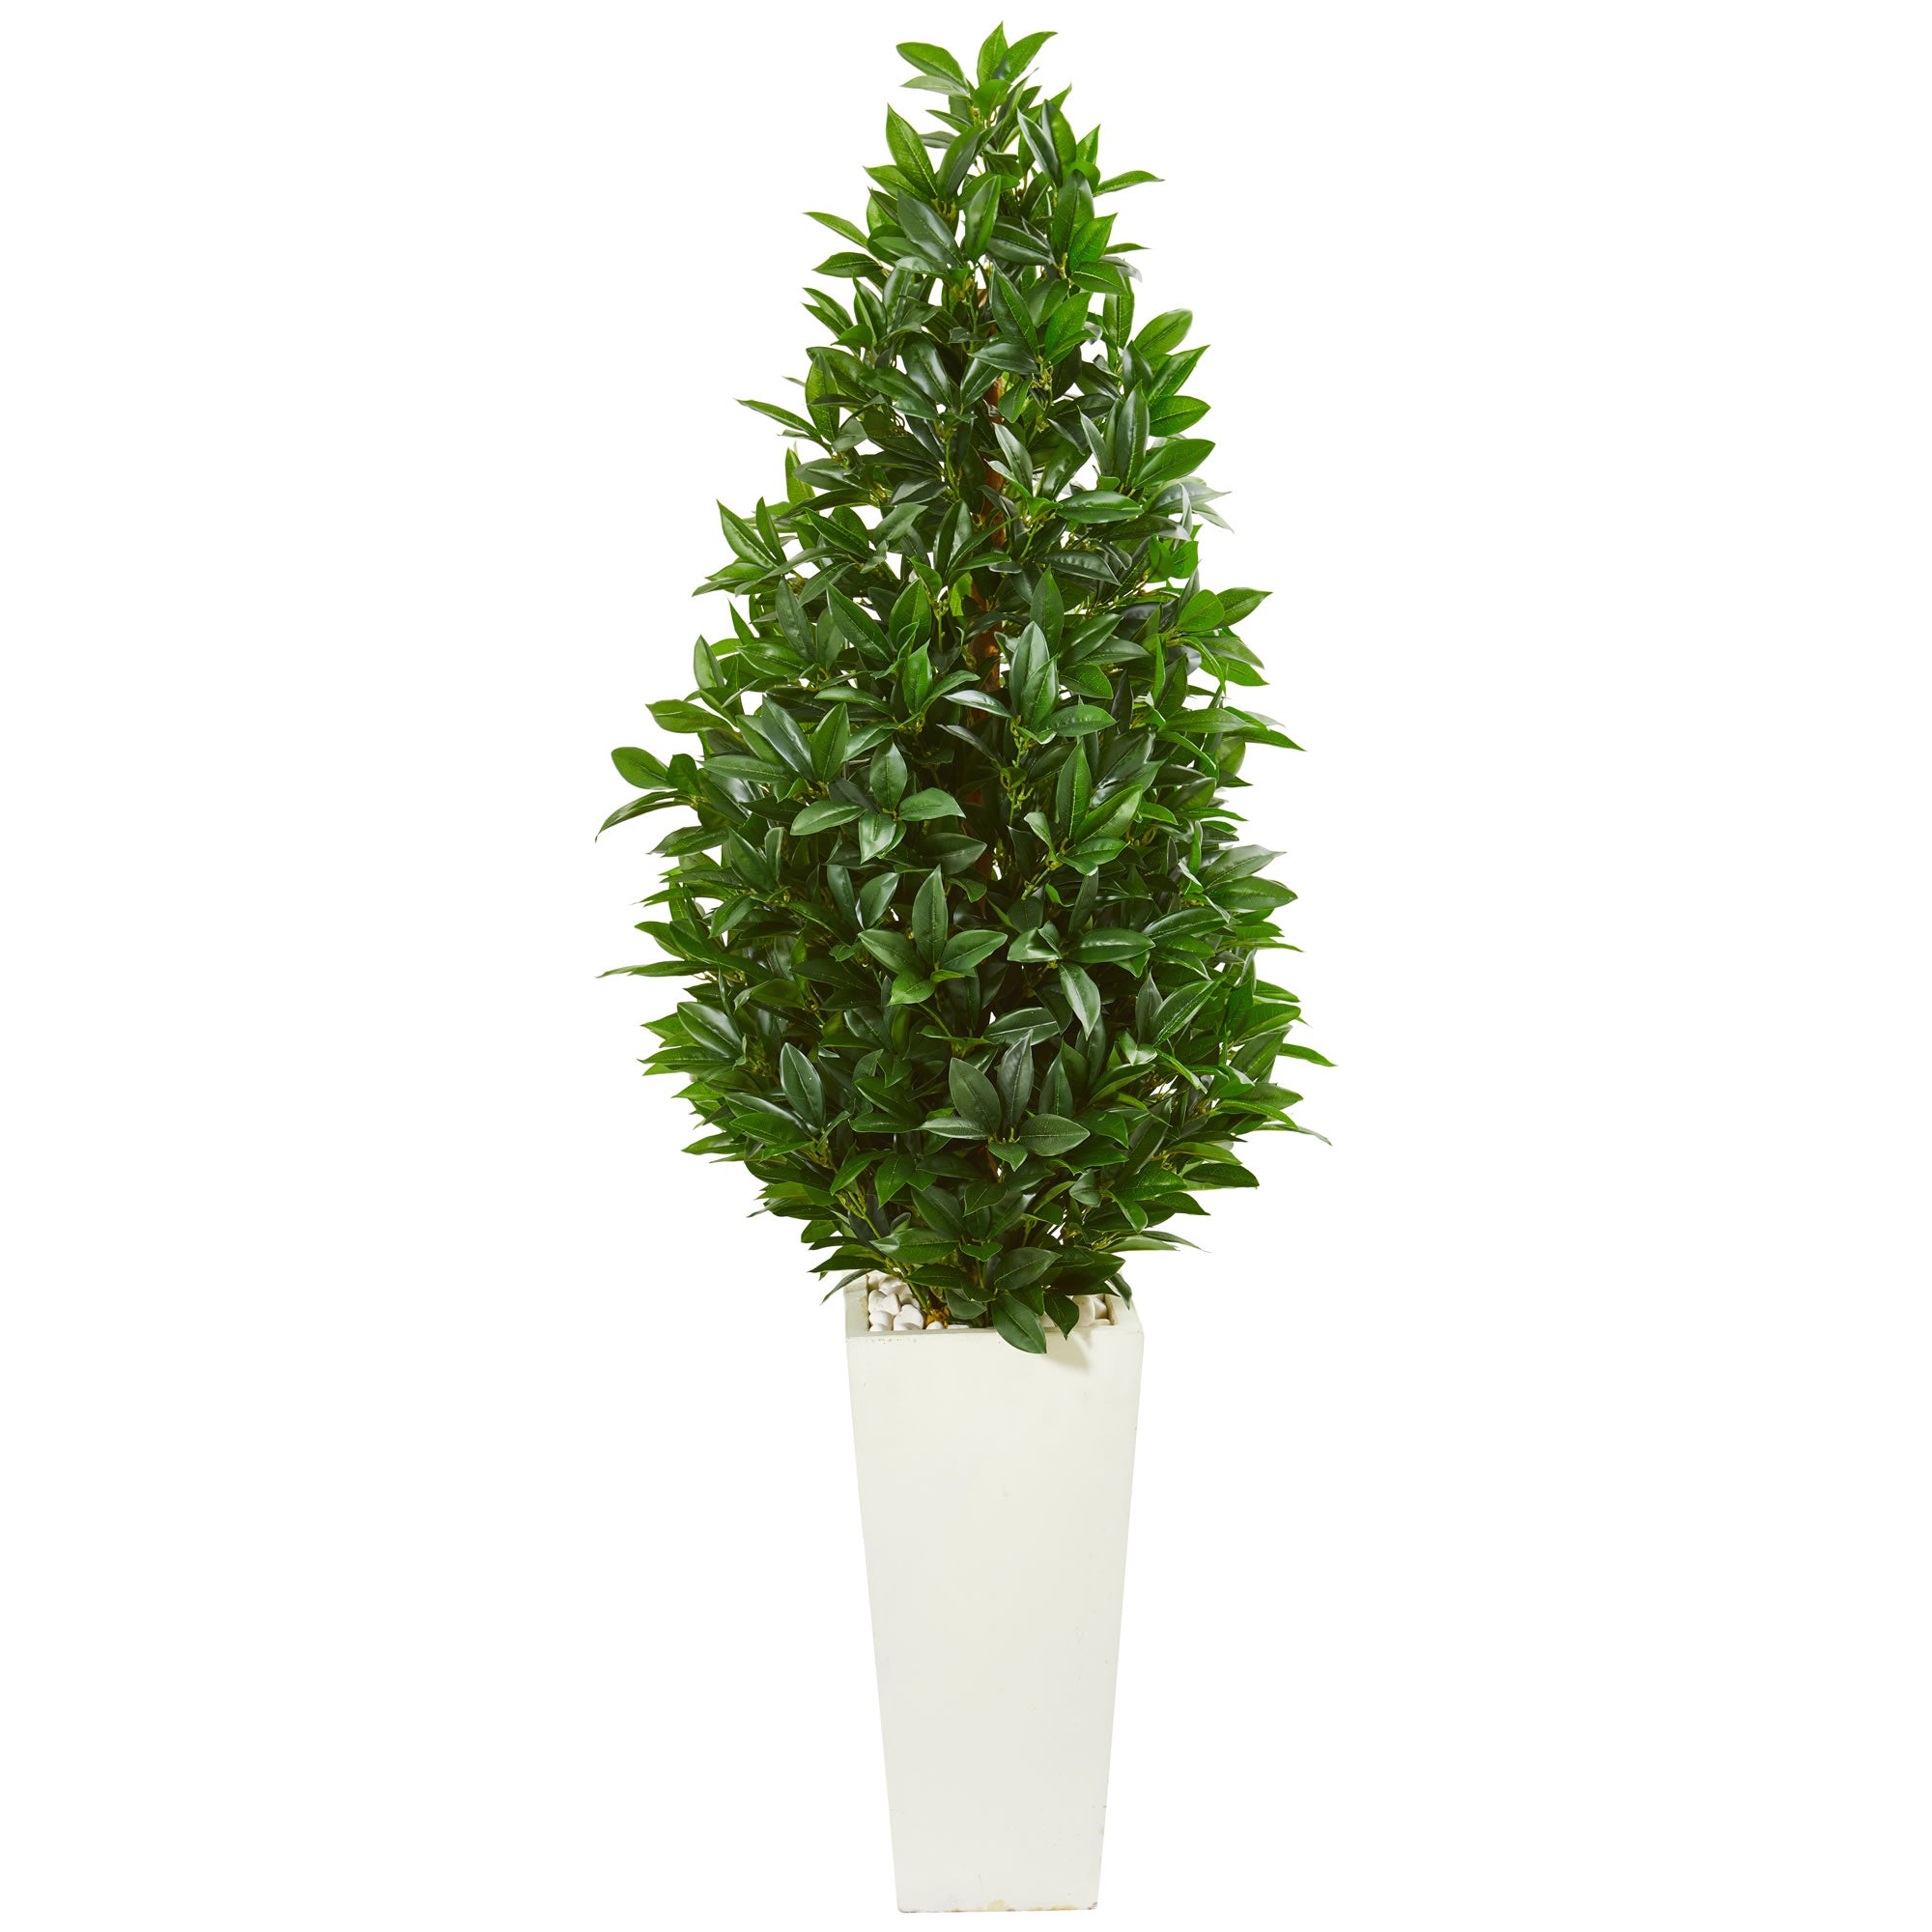 63" Bay Leaf Cone Topiary Artificial Tree in White Planter UV Resistant (Indoor/Outdoor)